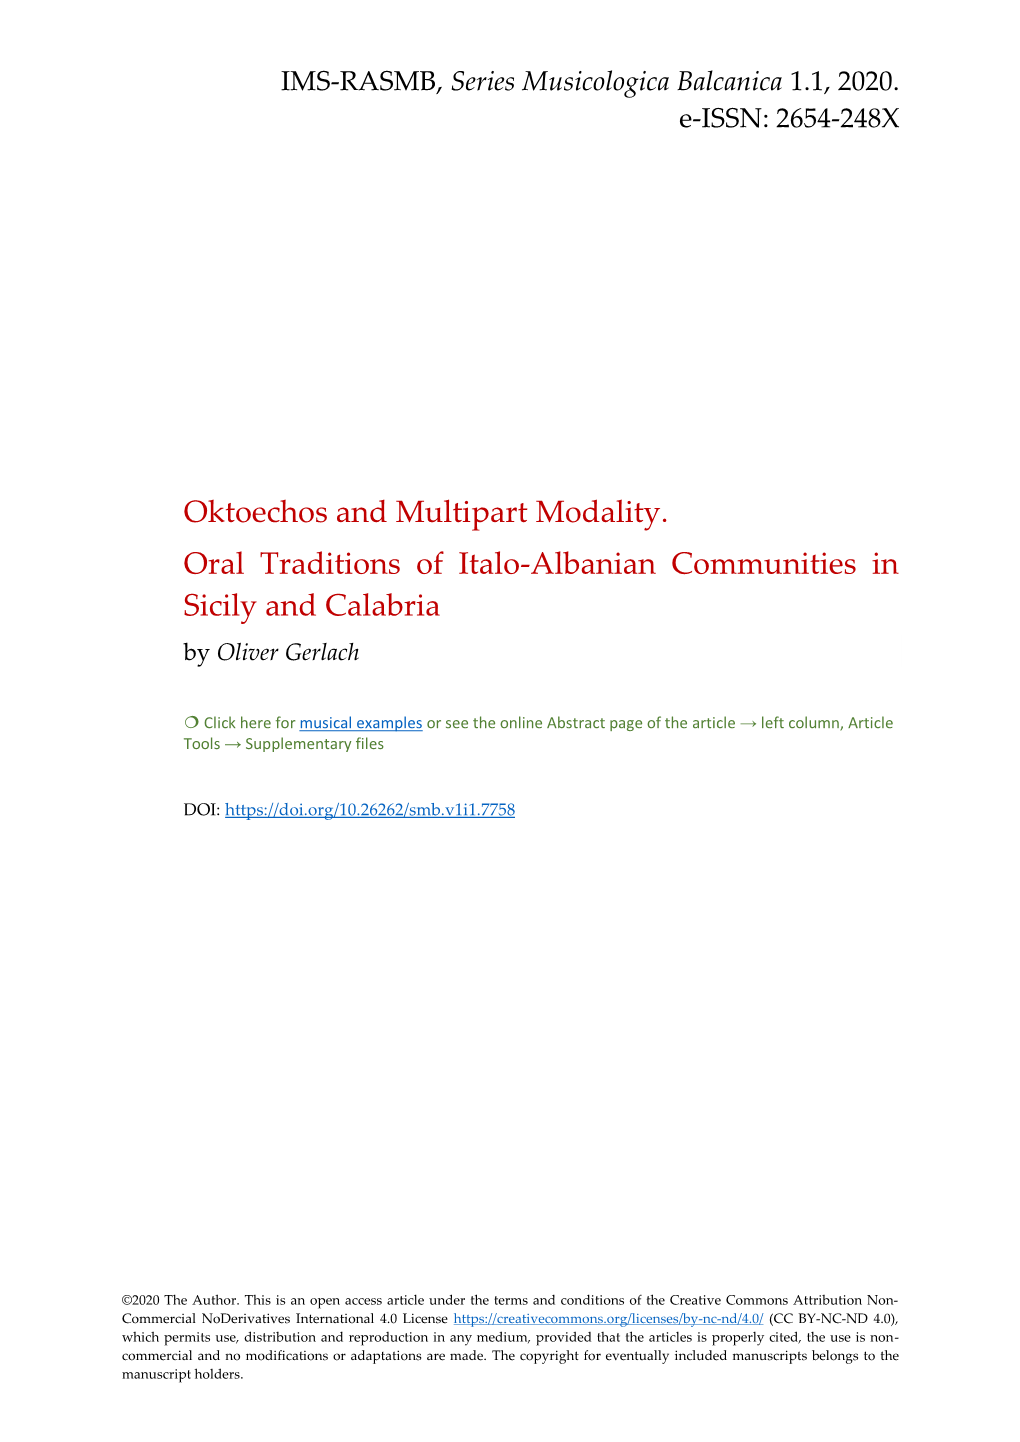 Oktoechos and Multipart Modality. Oral Traditions of Italo-Albanian Communities in Sicily and Calabria by Oliver Gerlach